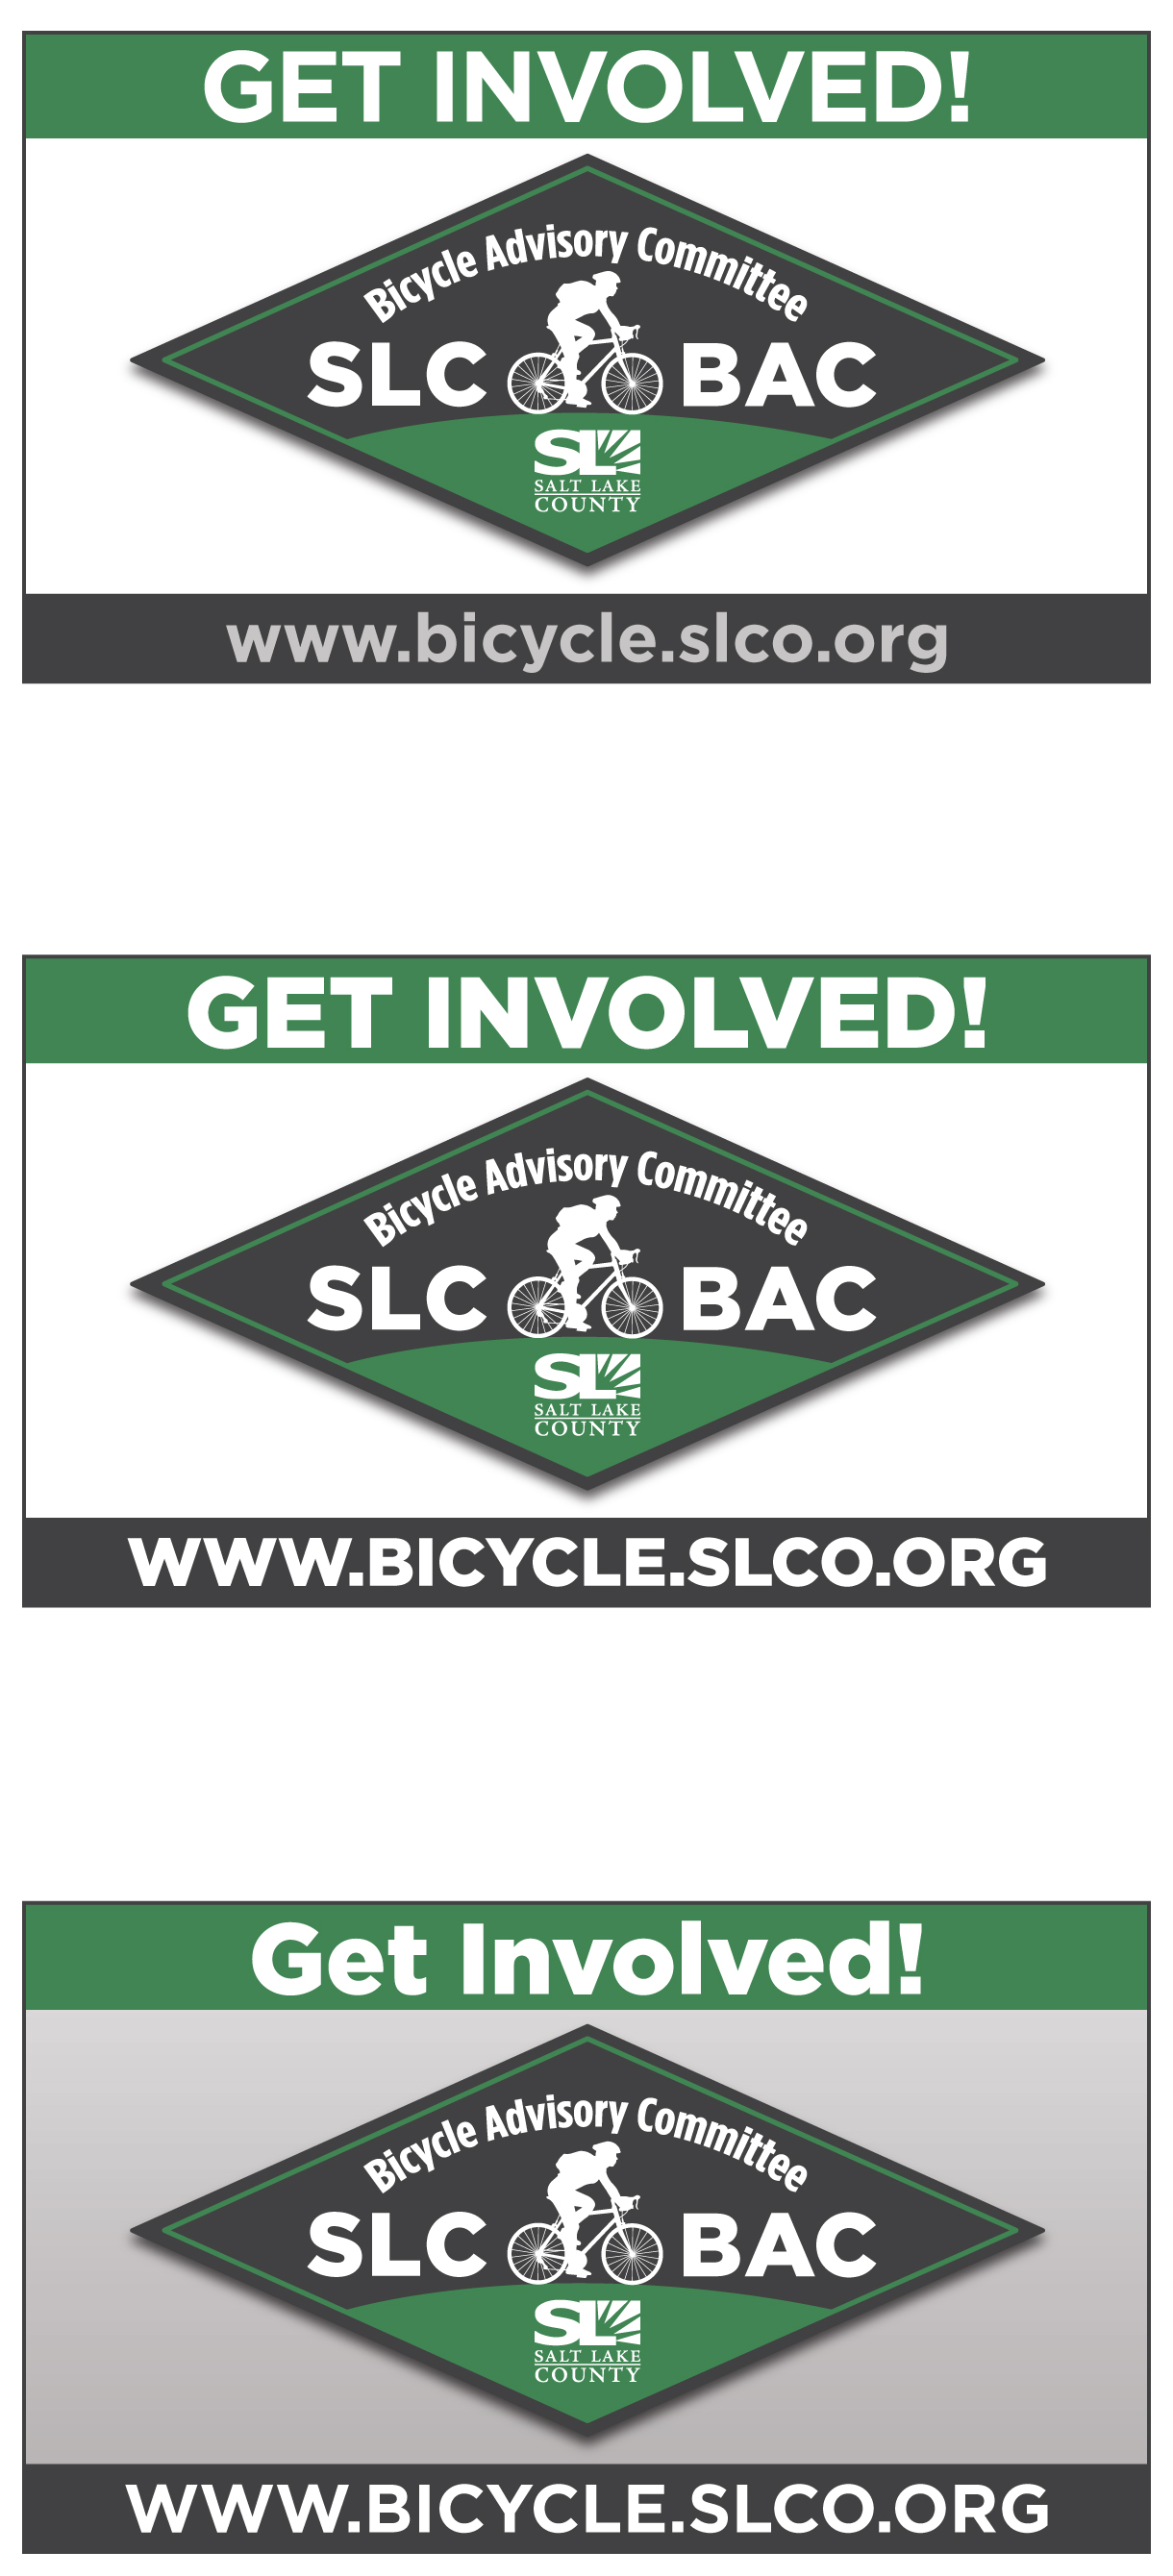 SLCBAC News for August 2016